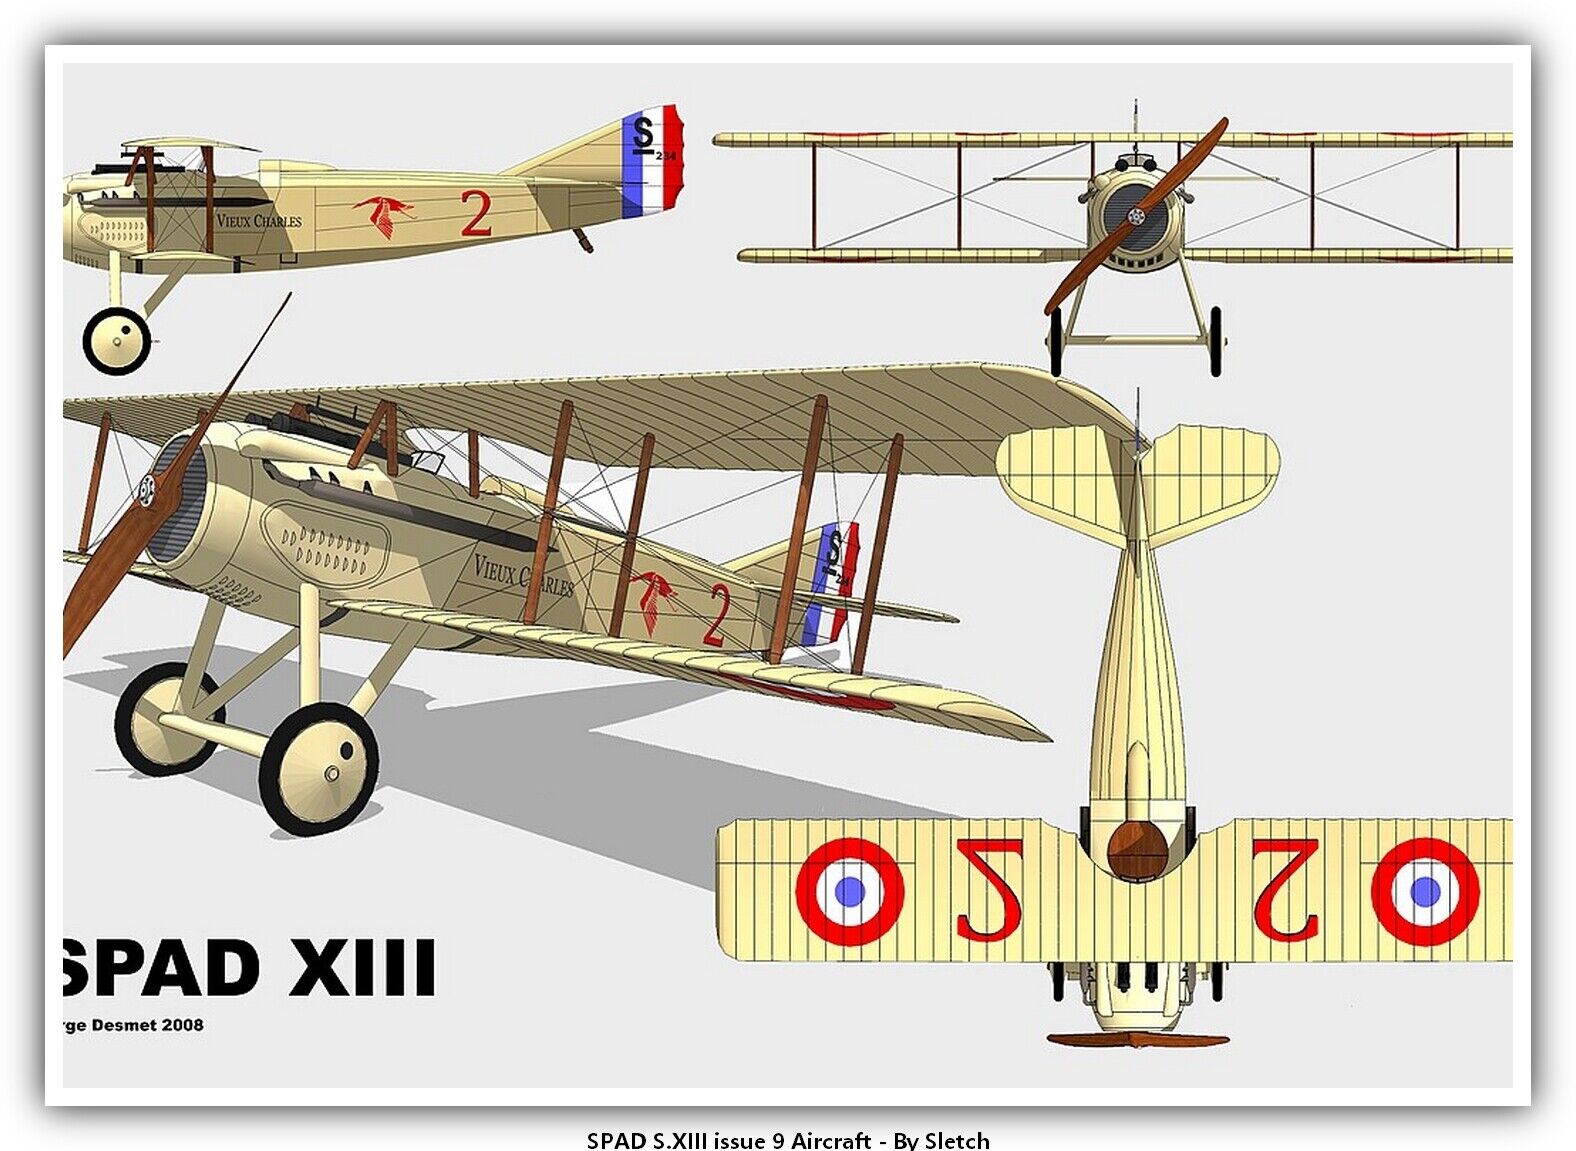 SPAD S.XIII issue 9 Aircraft